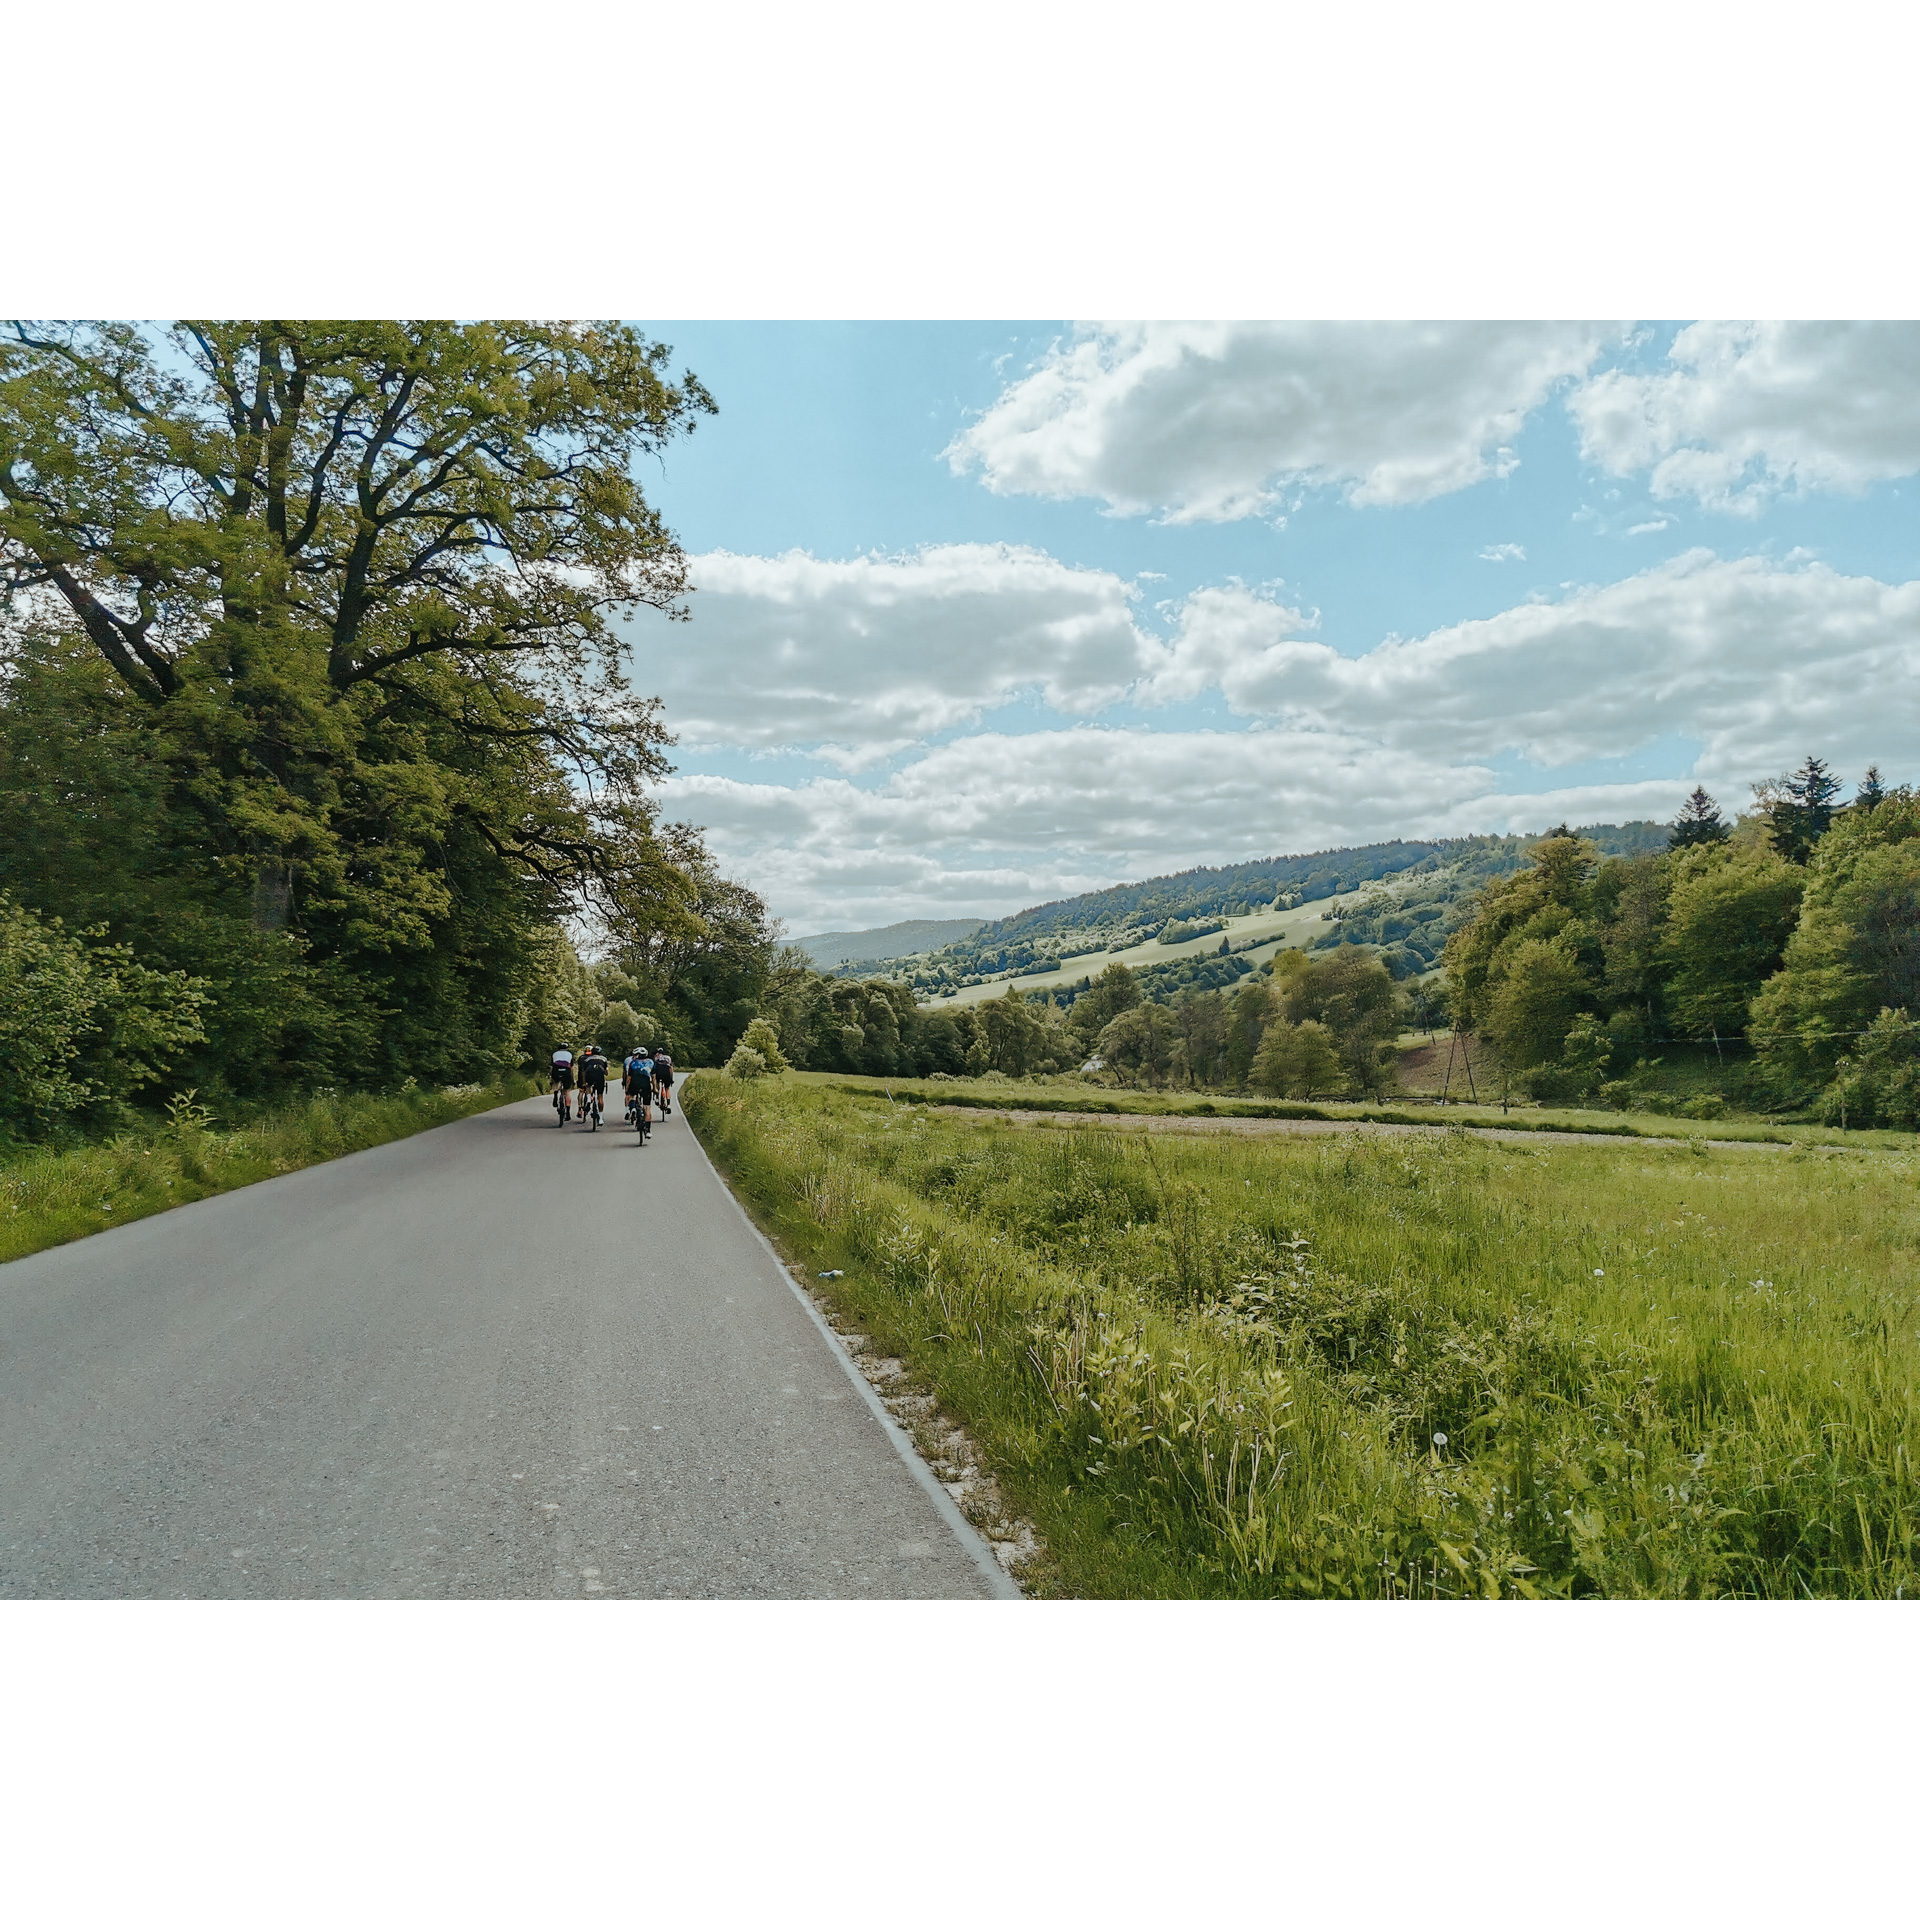 A group of cyclists riding an asphalt road passing trees and densely grassed meadows against the backdrop of forested hills